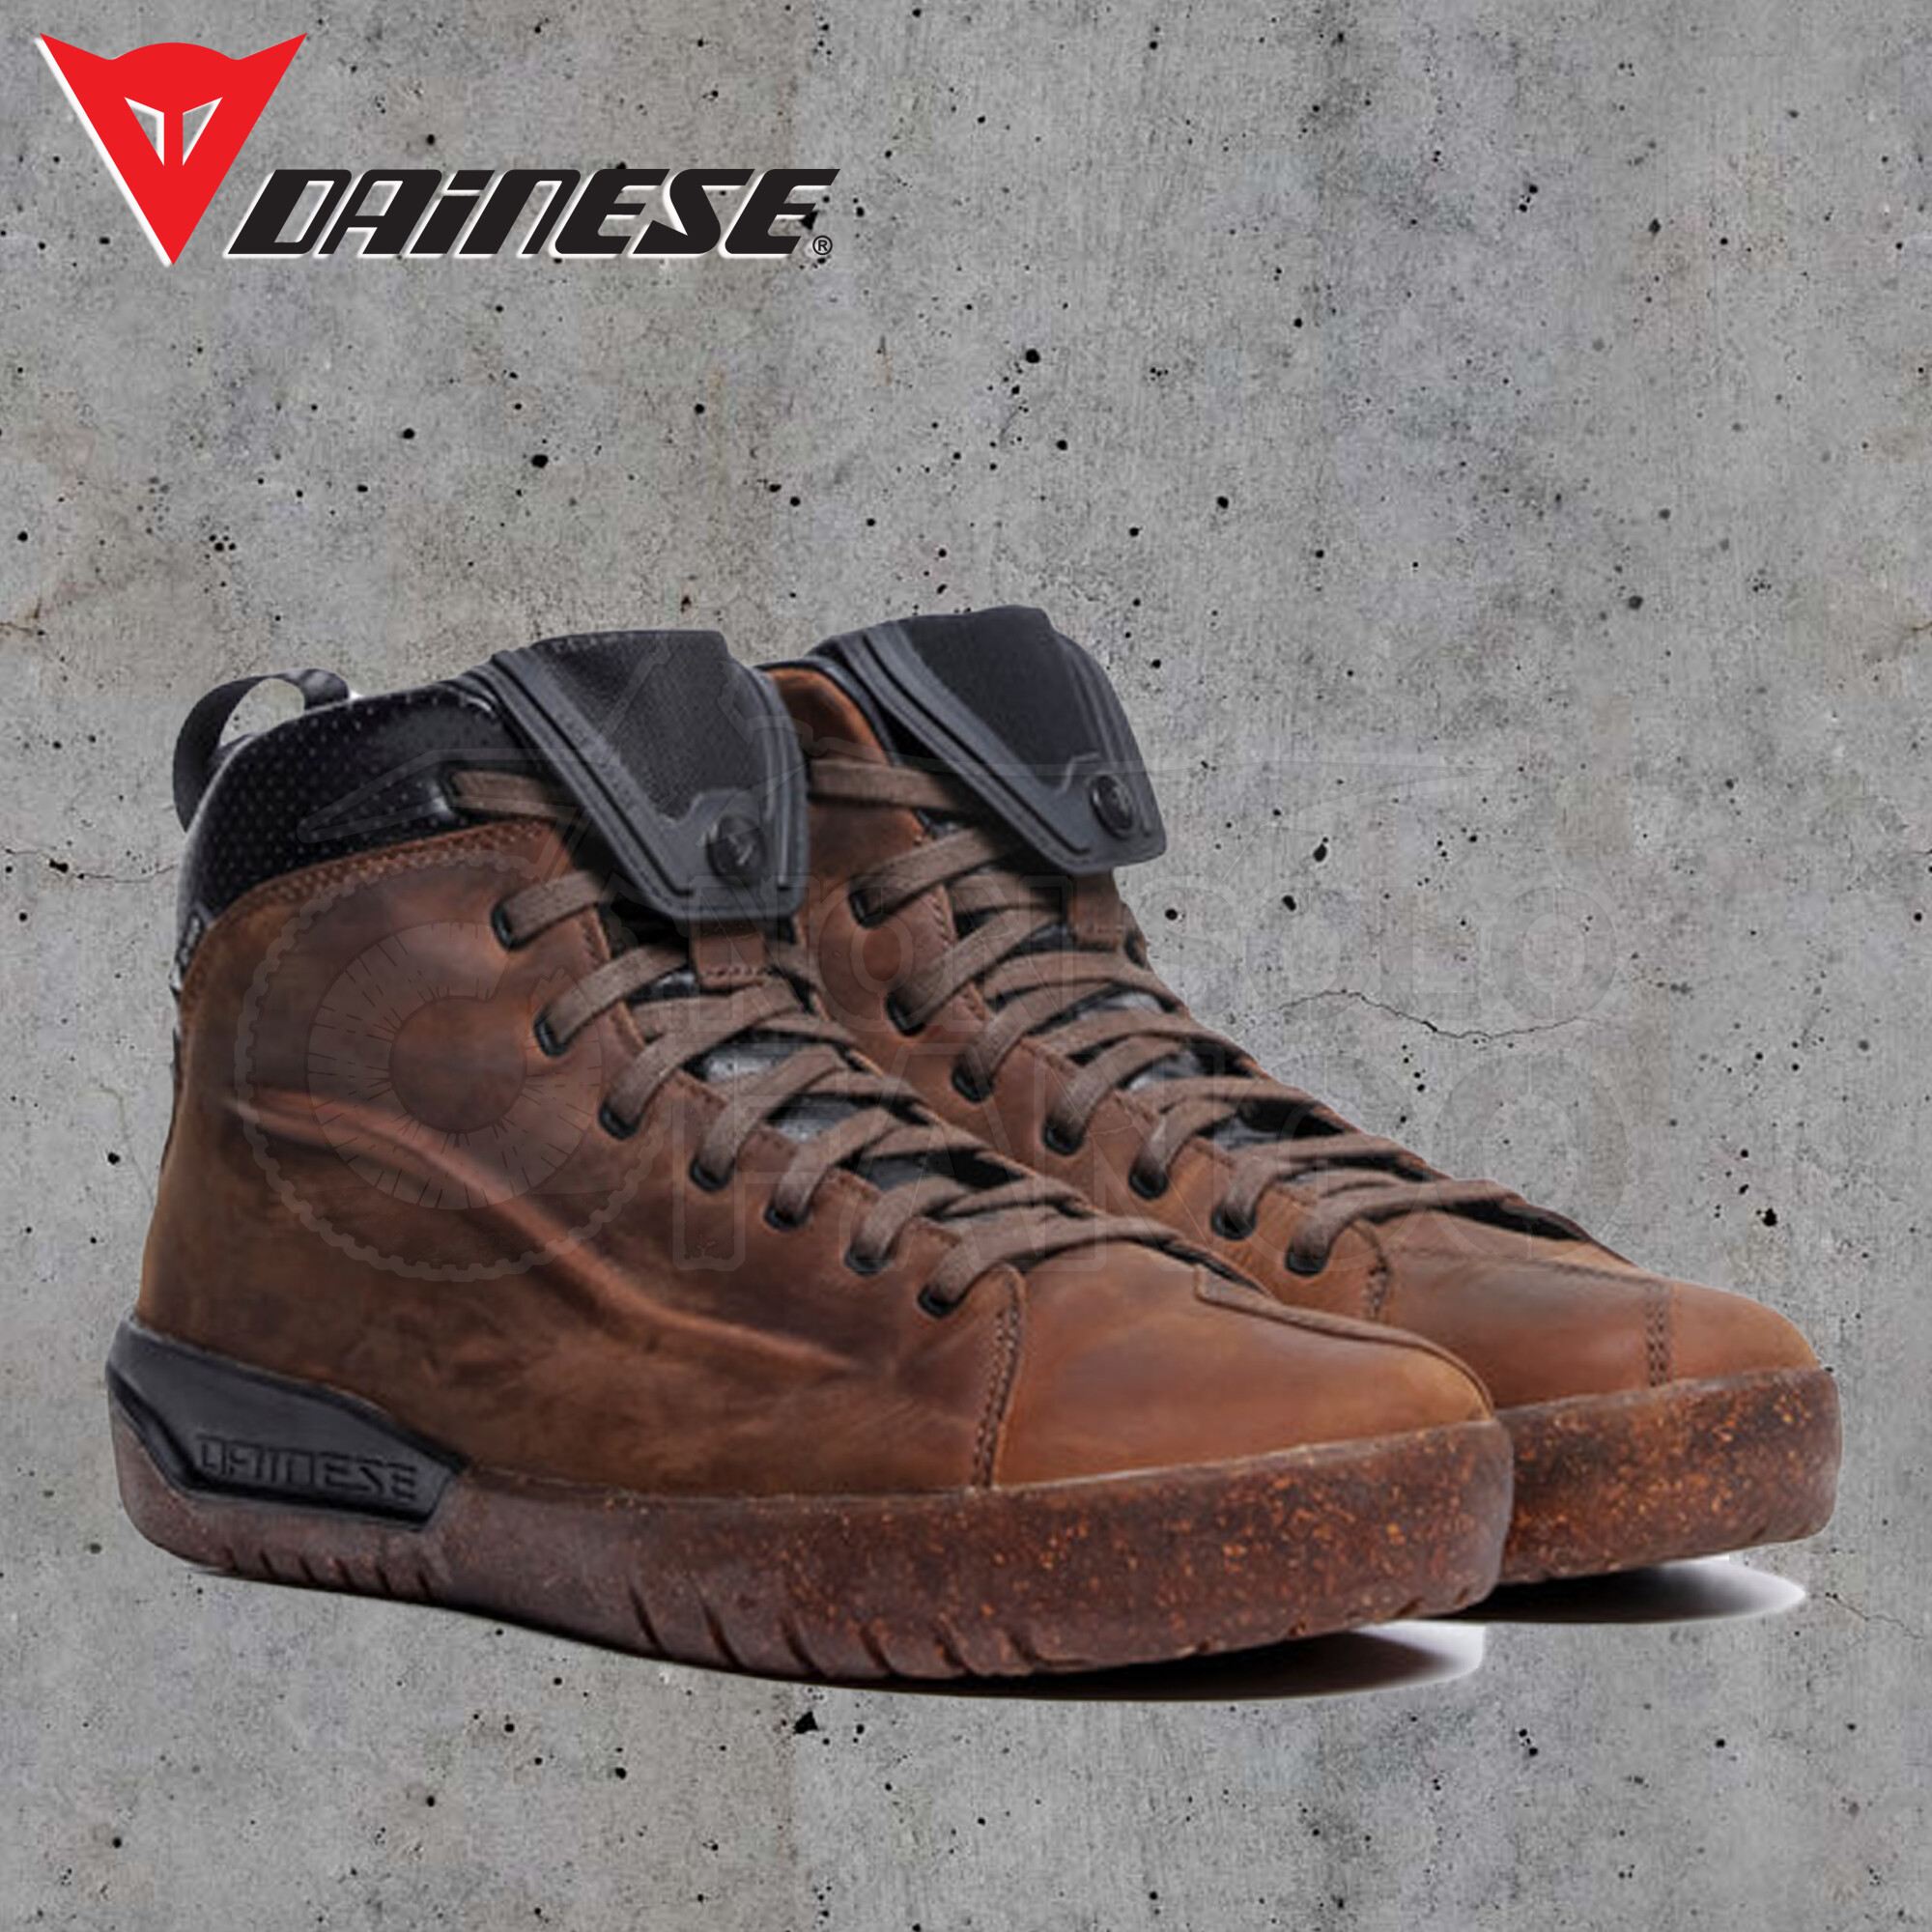 Scarpe Sneakers Dainese METRACTIVE D-WP SHOES Brown/Natural-Rubber